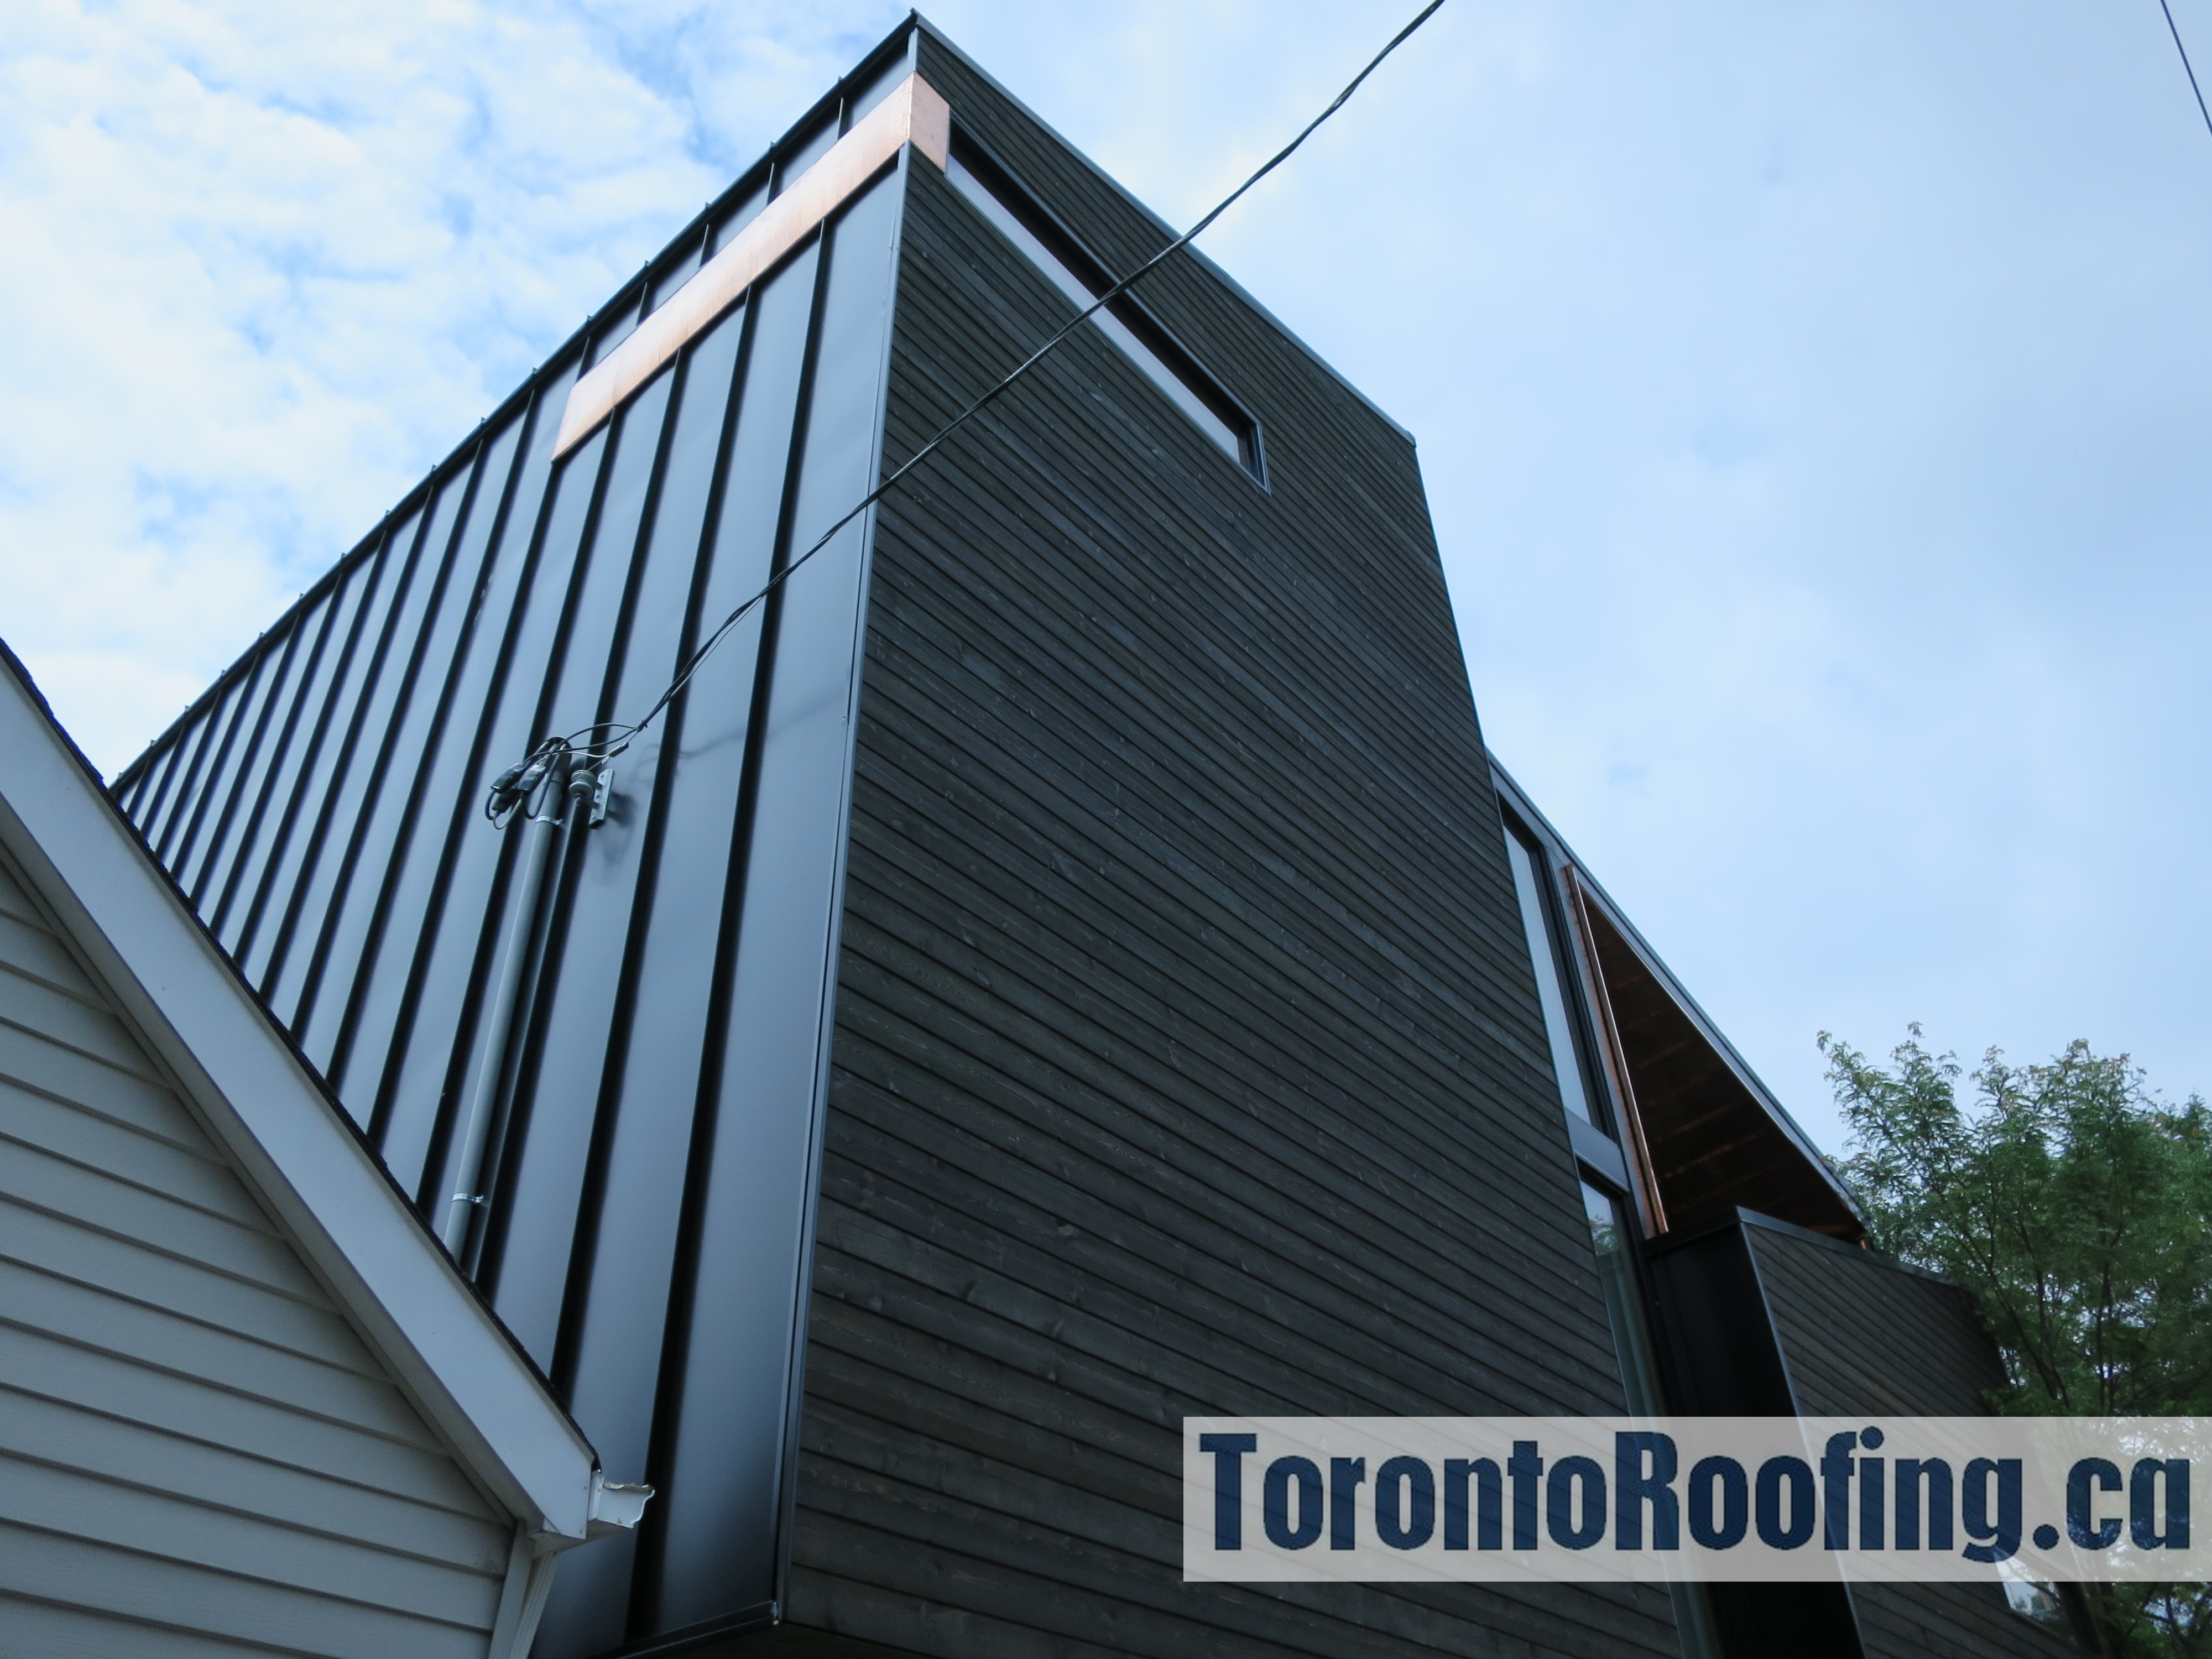 toronto-roofing-roof-siding-metal-copper-wood-modern-homes-aluminum-cladding-architeture-building-contractor-exterior-11